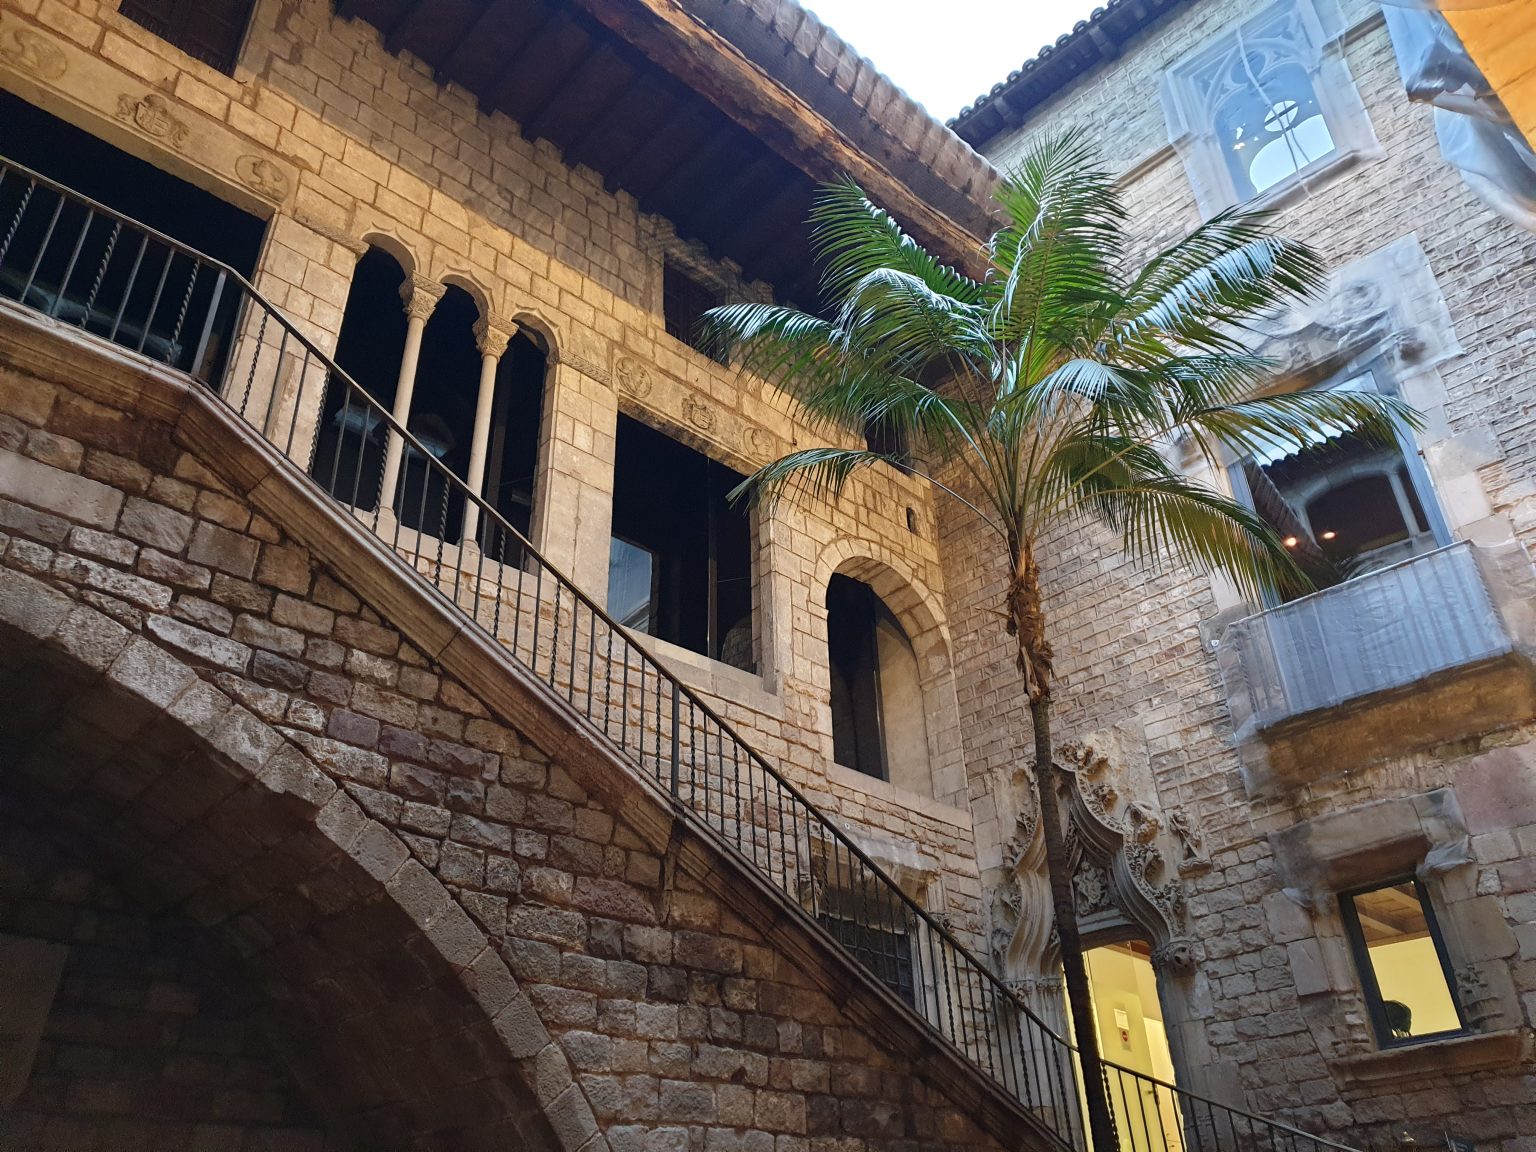 The courtyard of a medieval palace is the entrance to the Picasso Museum in Barcelona.